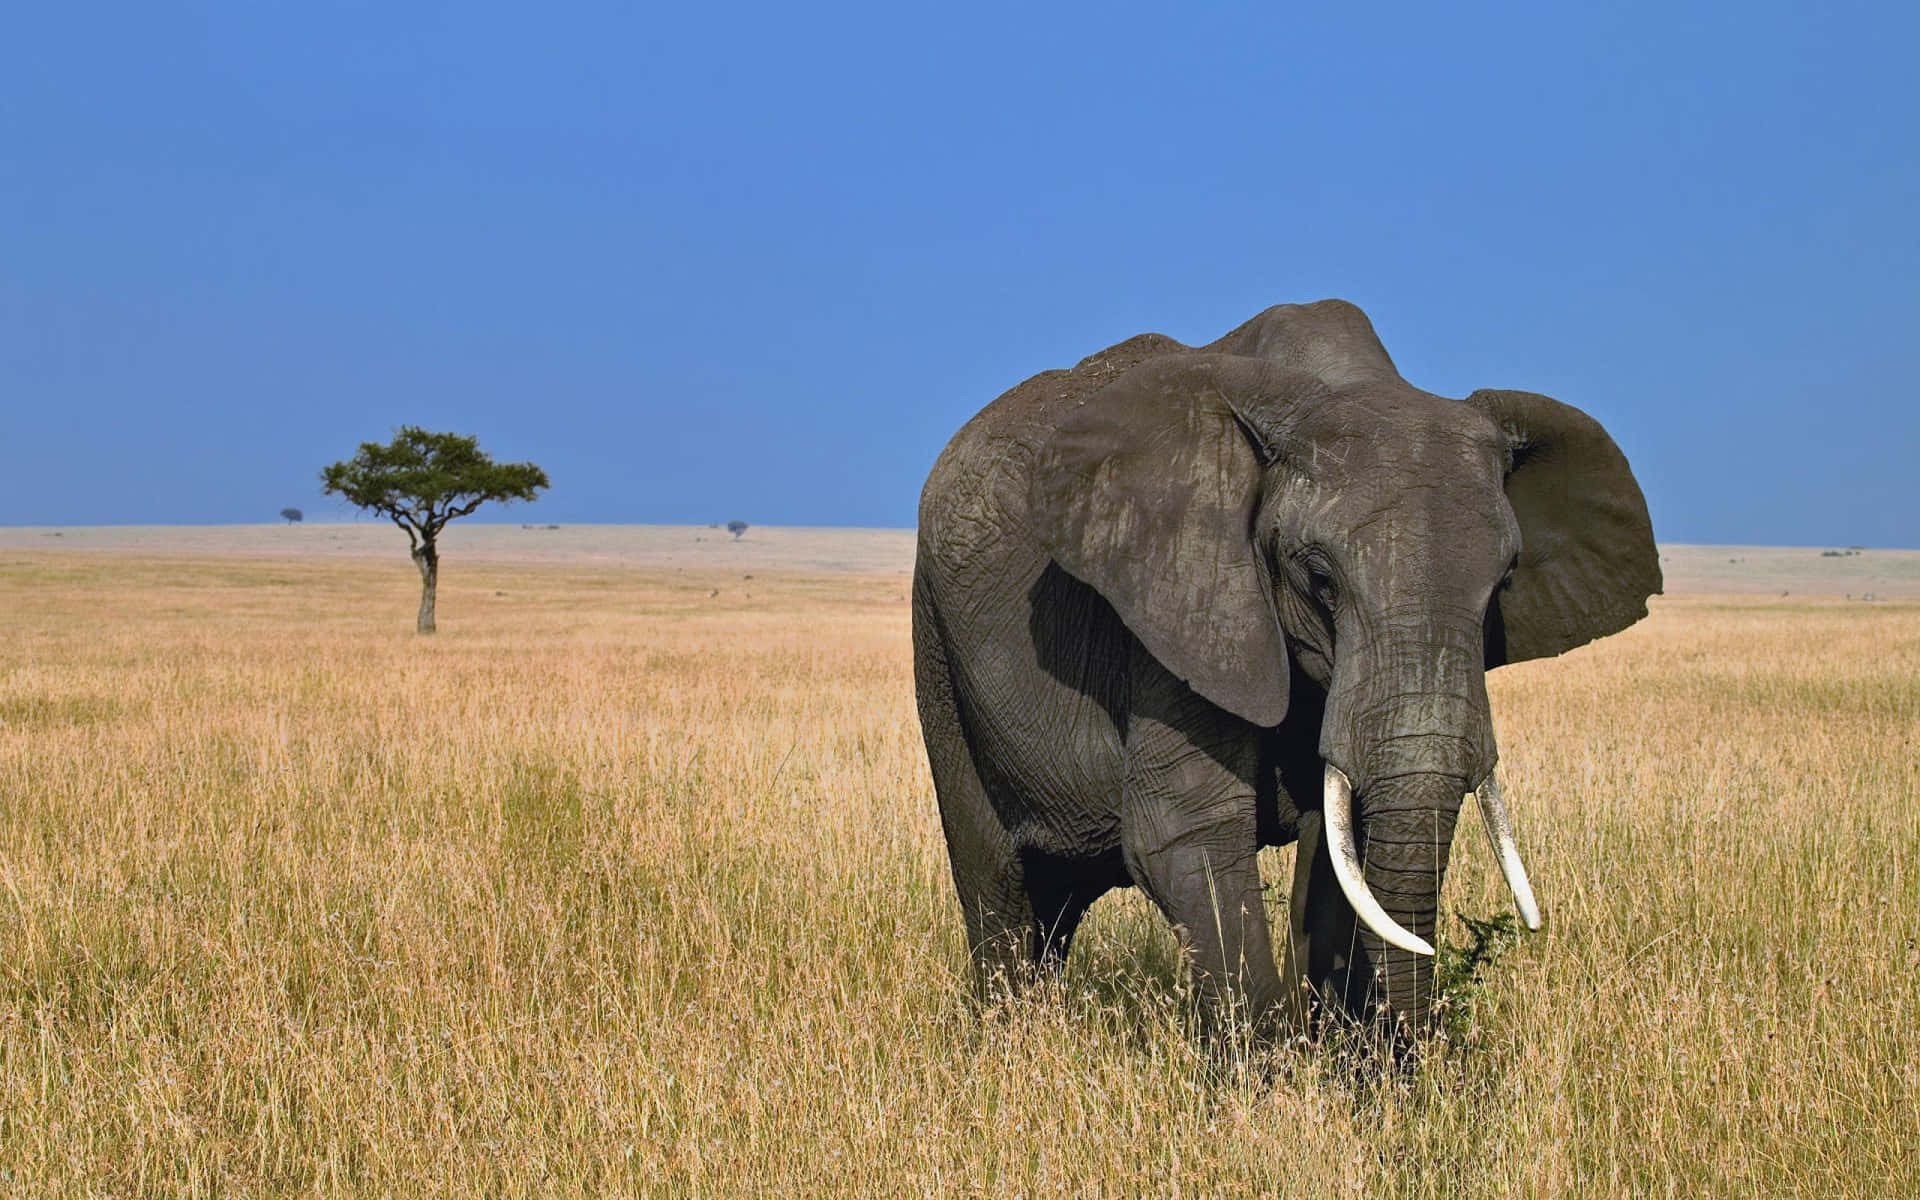 A Large Elephant In The Grass